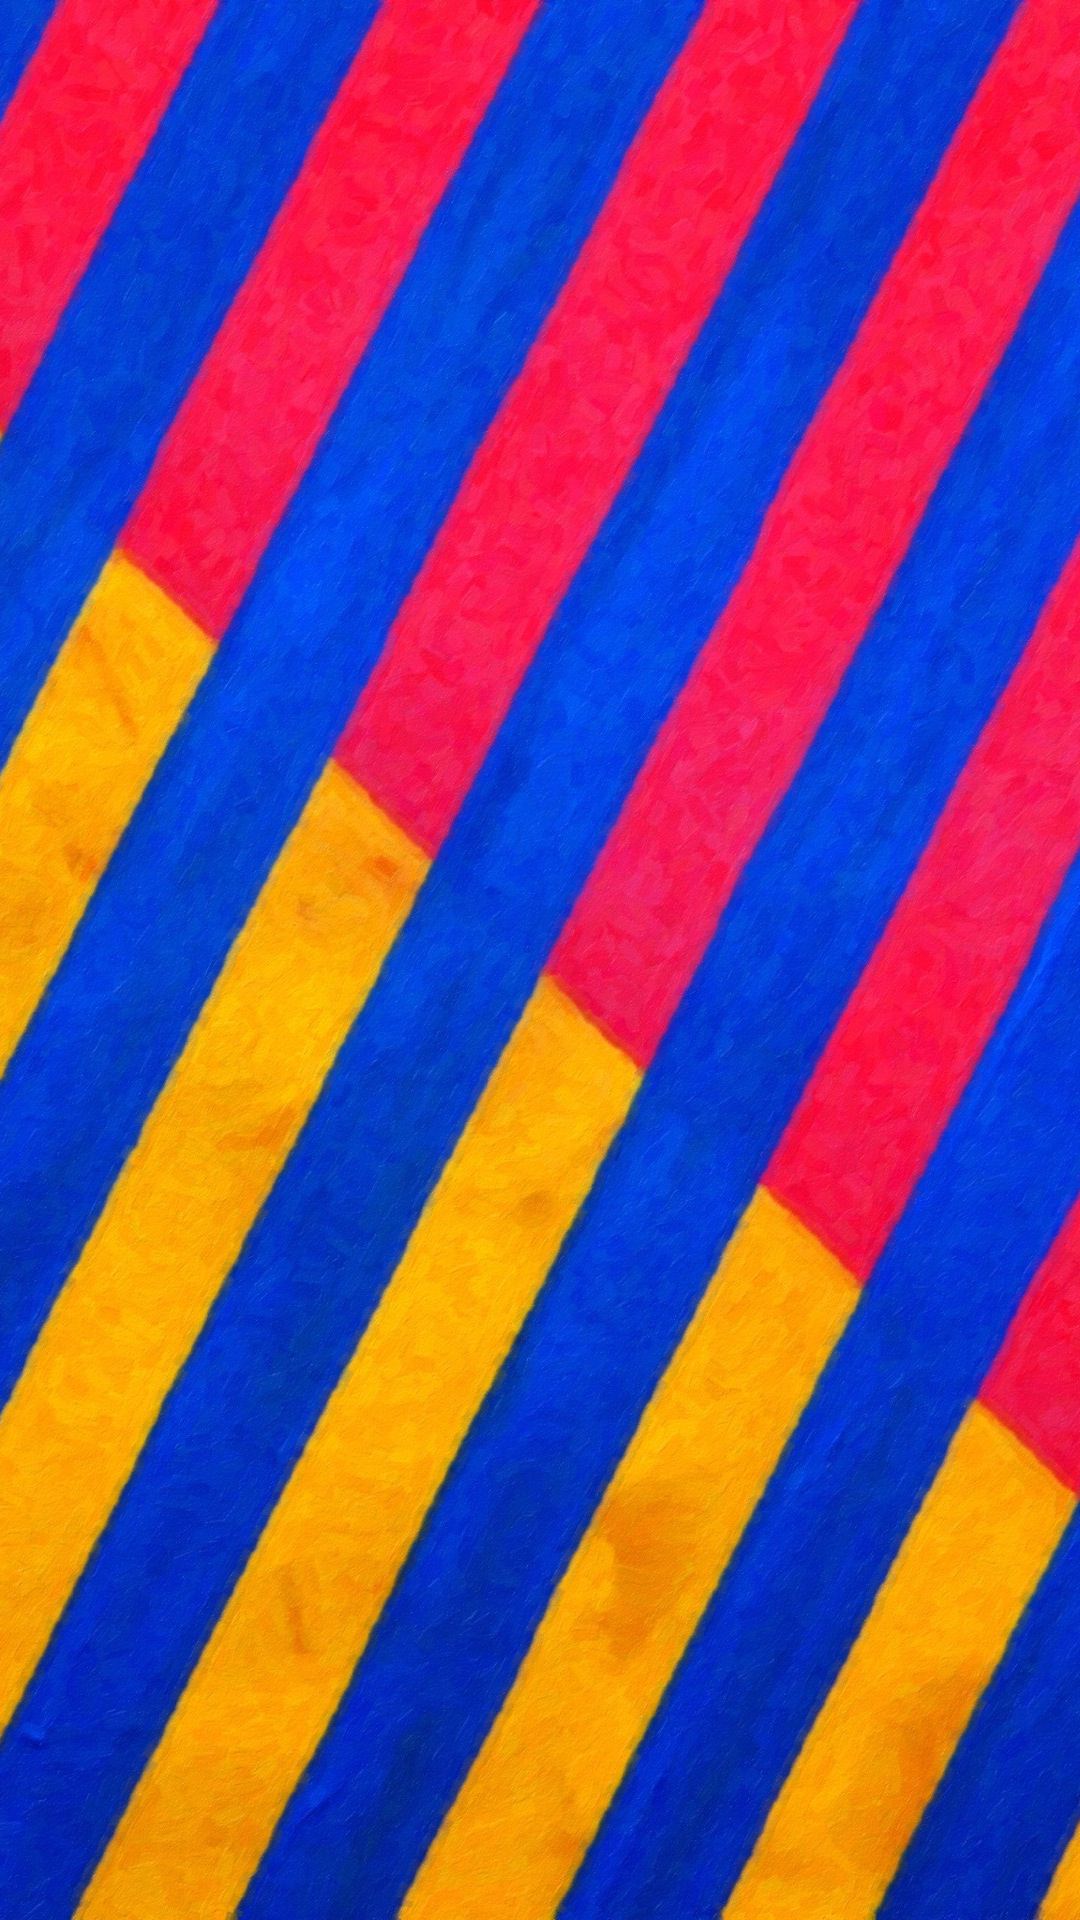 Red, blue and yellow pattern | wallpaper.sc SmartPhone